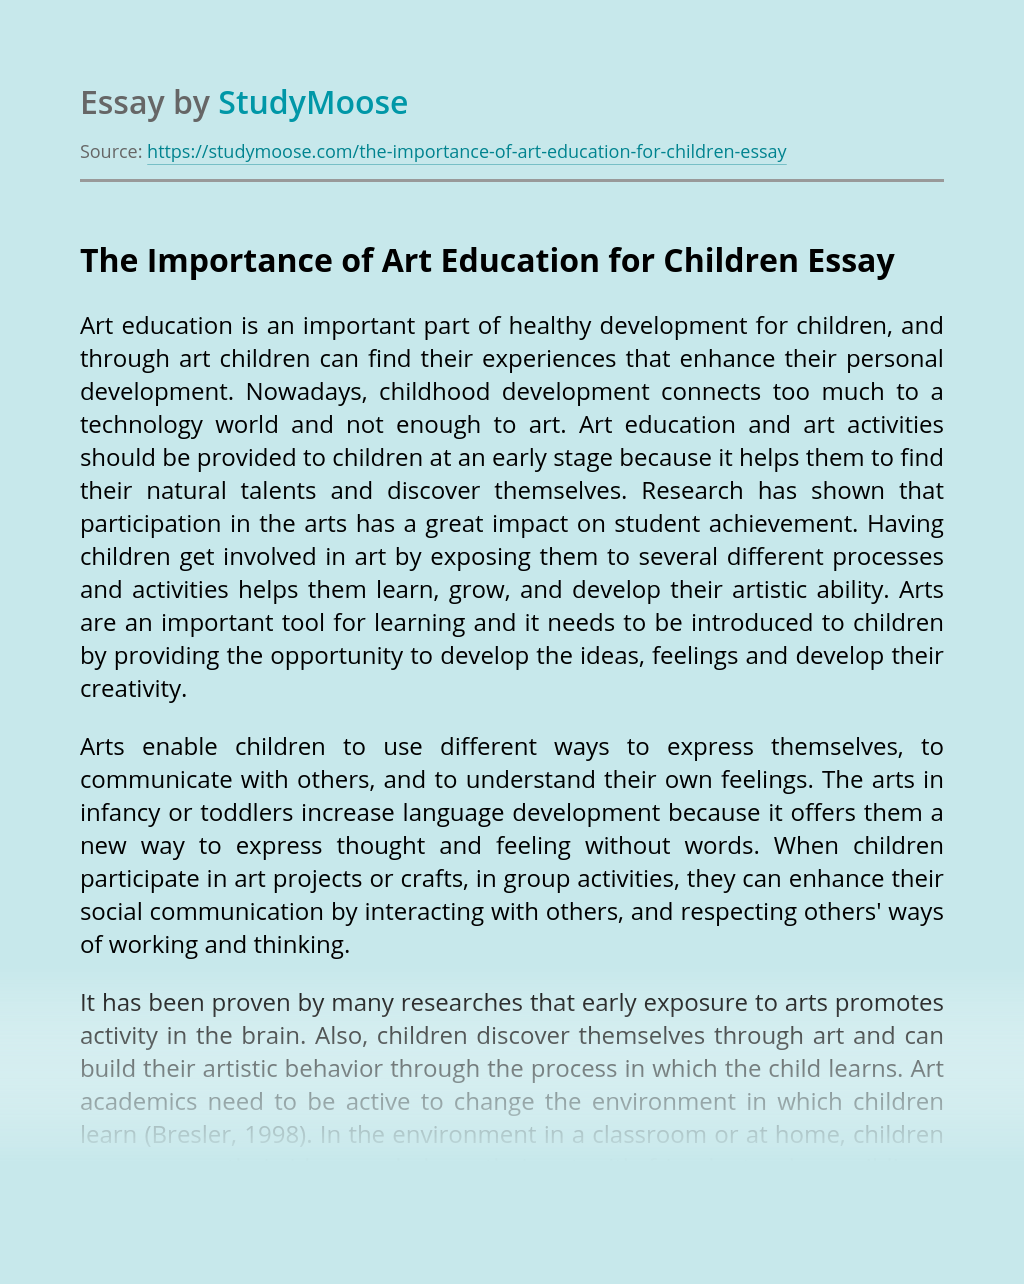 essay on importance of research in education